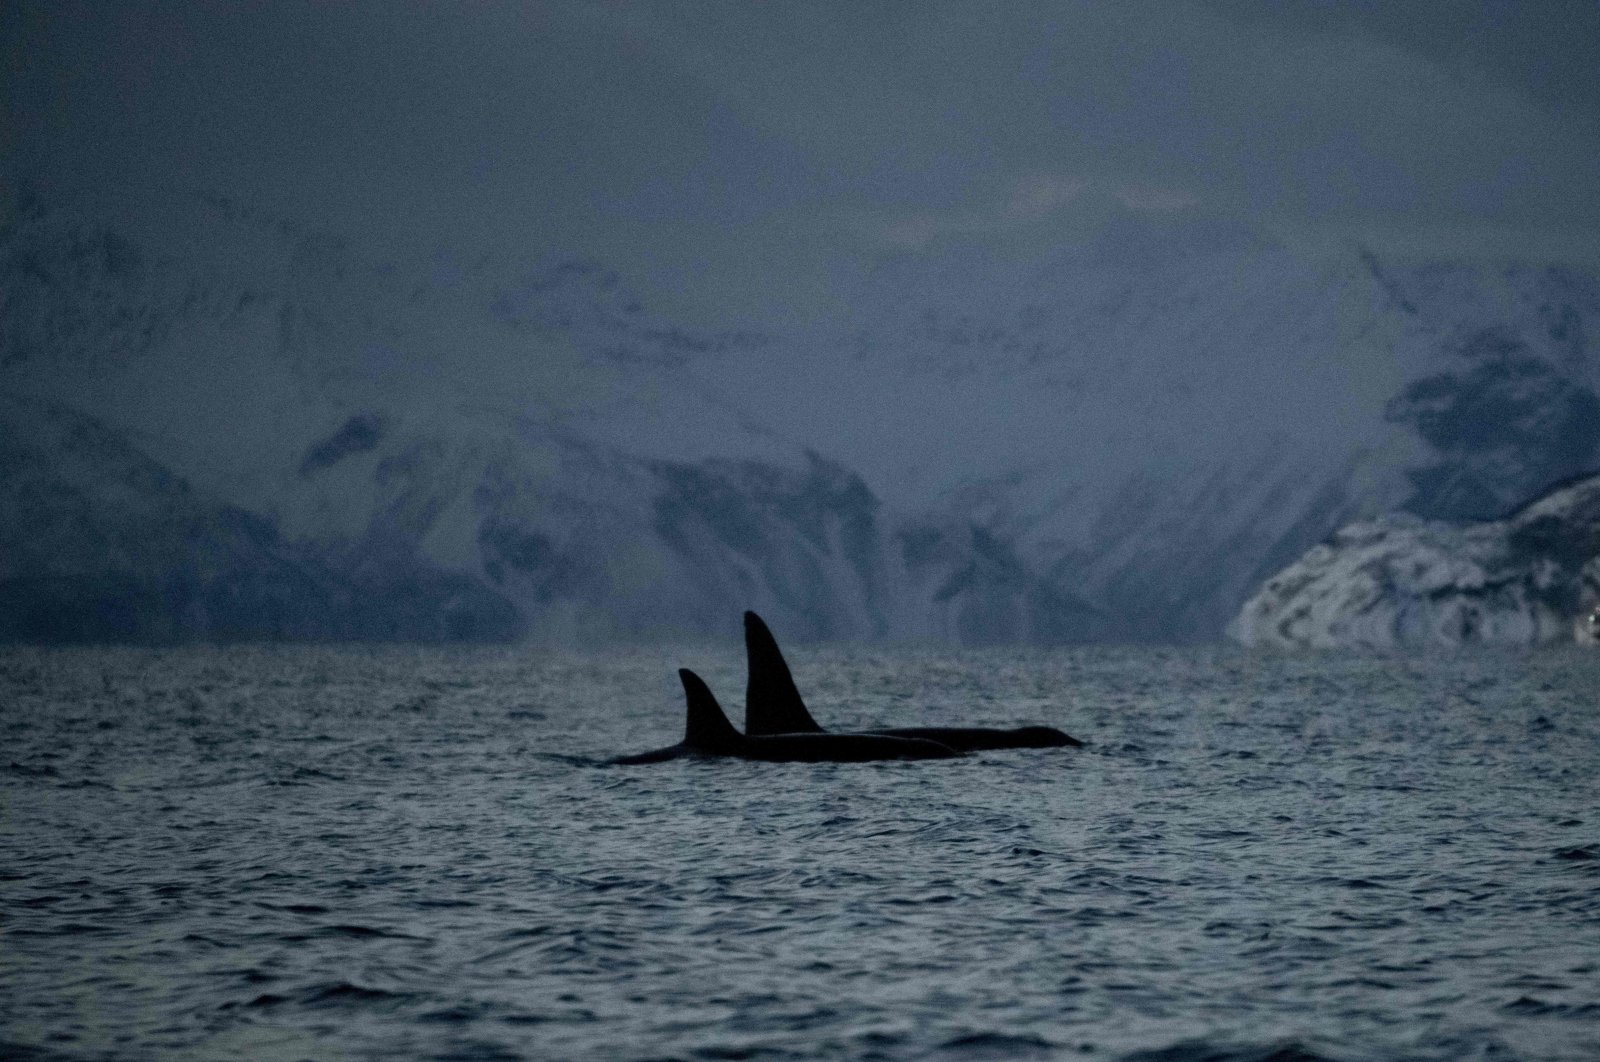 Killer whales (orcas) are spotted in the fjord of Skjervoy, northern Norway, Nov. 24, 2021. (AFP Photo)